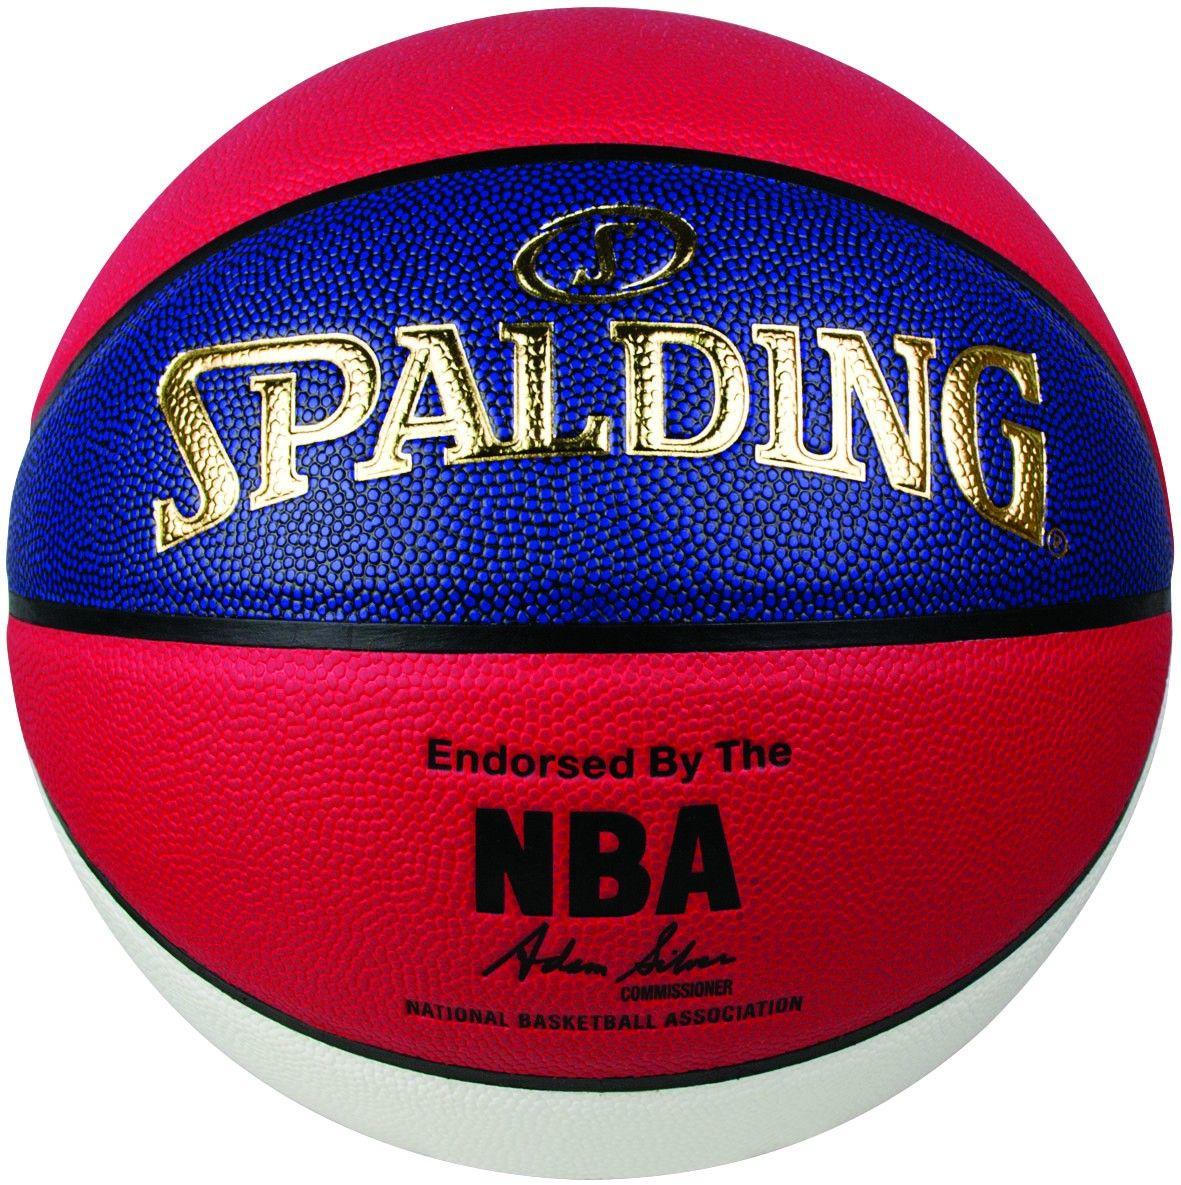 Red White and Blue Basketball Logo - NBA Logoman - Red/White/Blue - Size 7